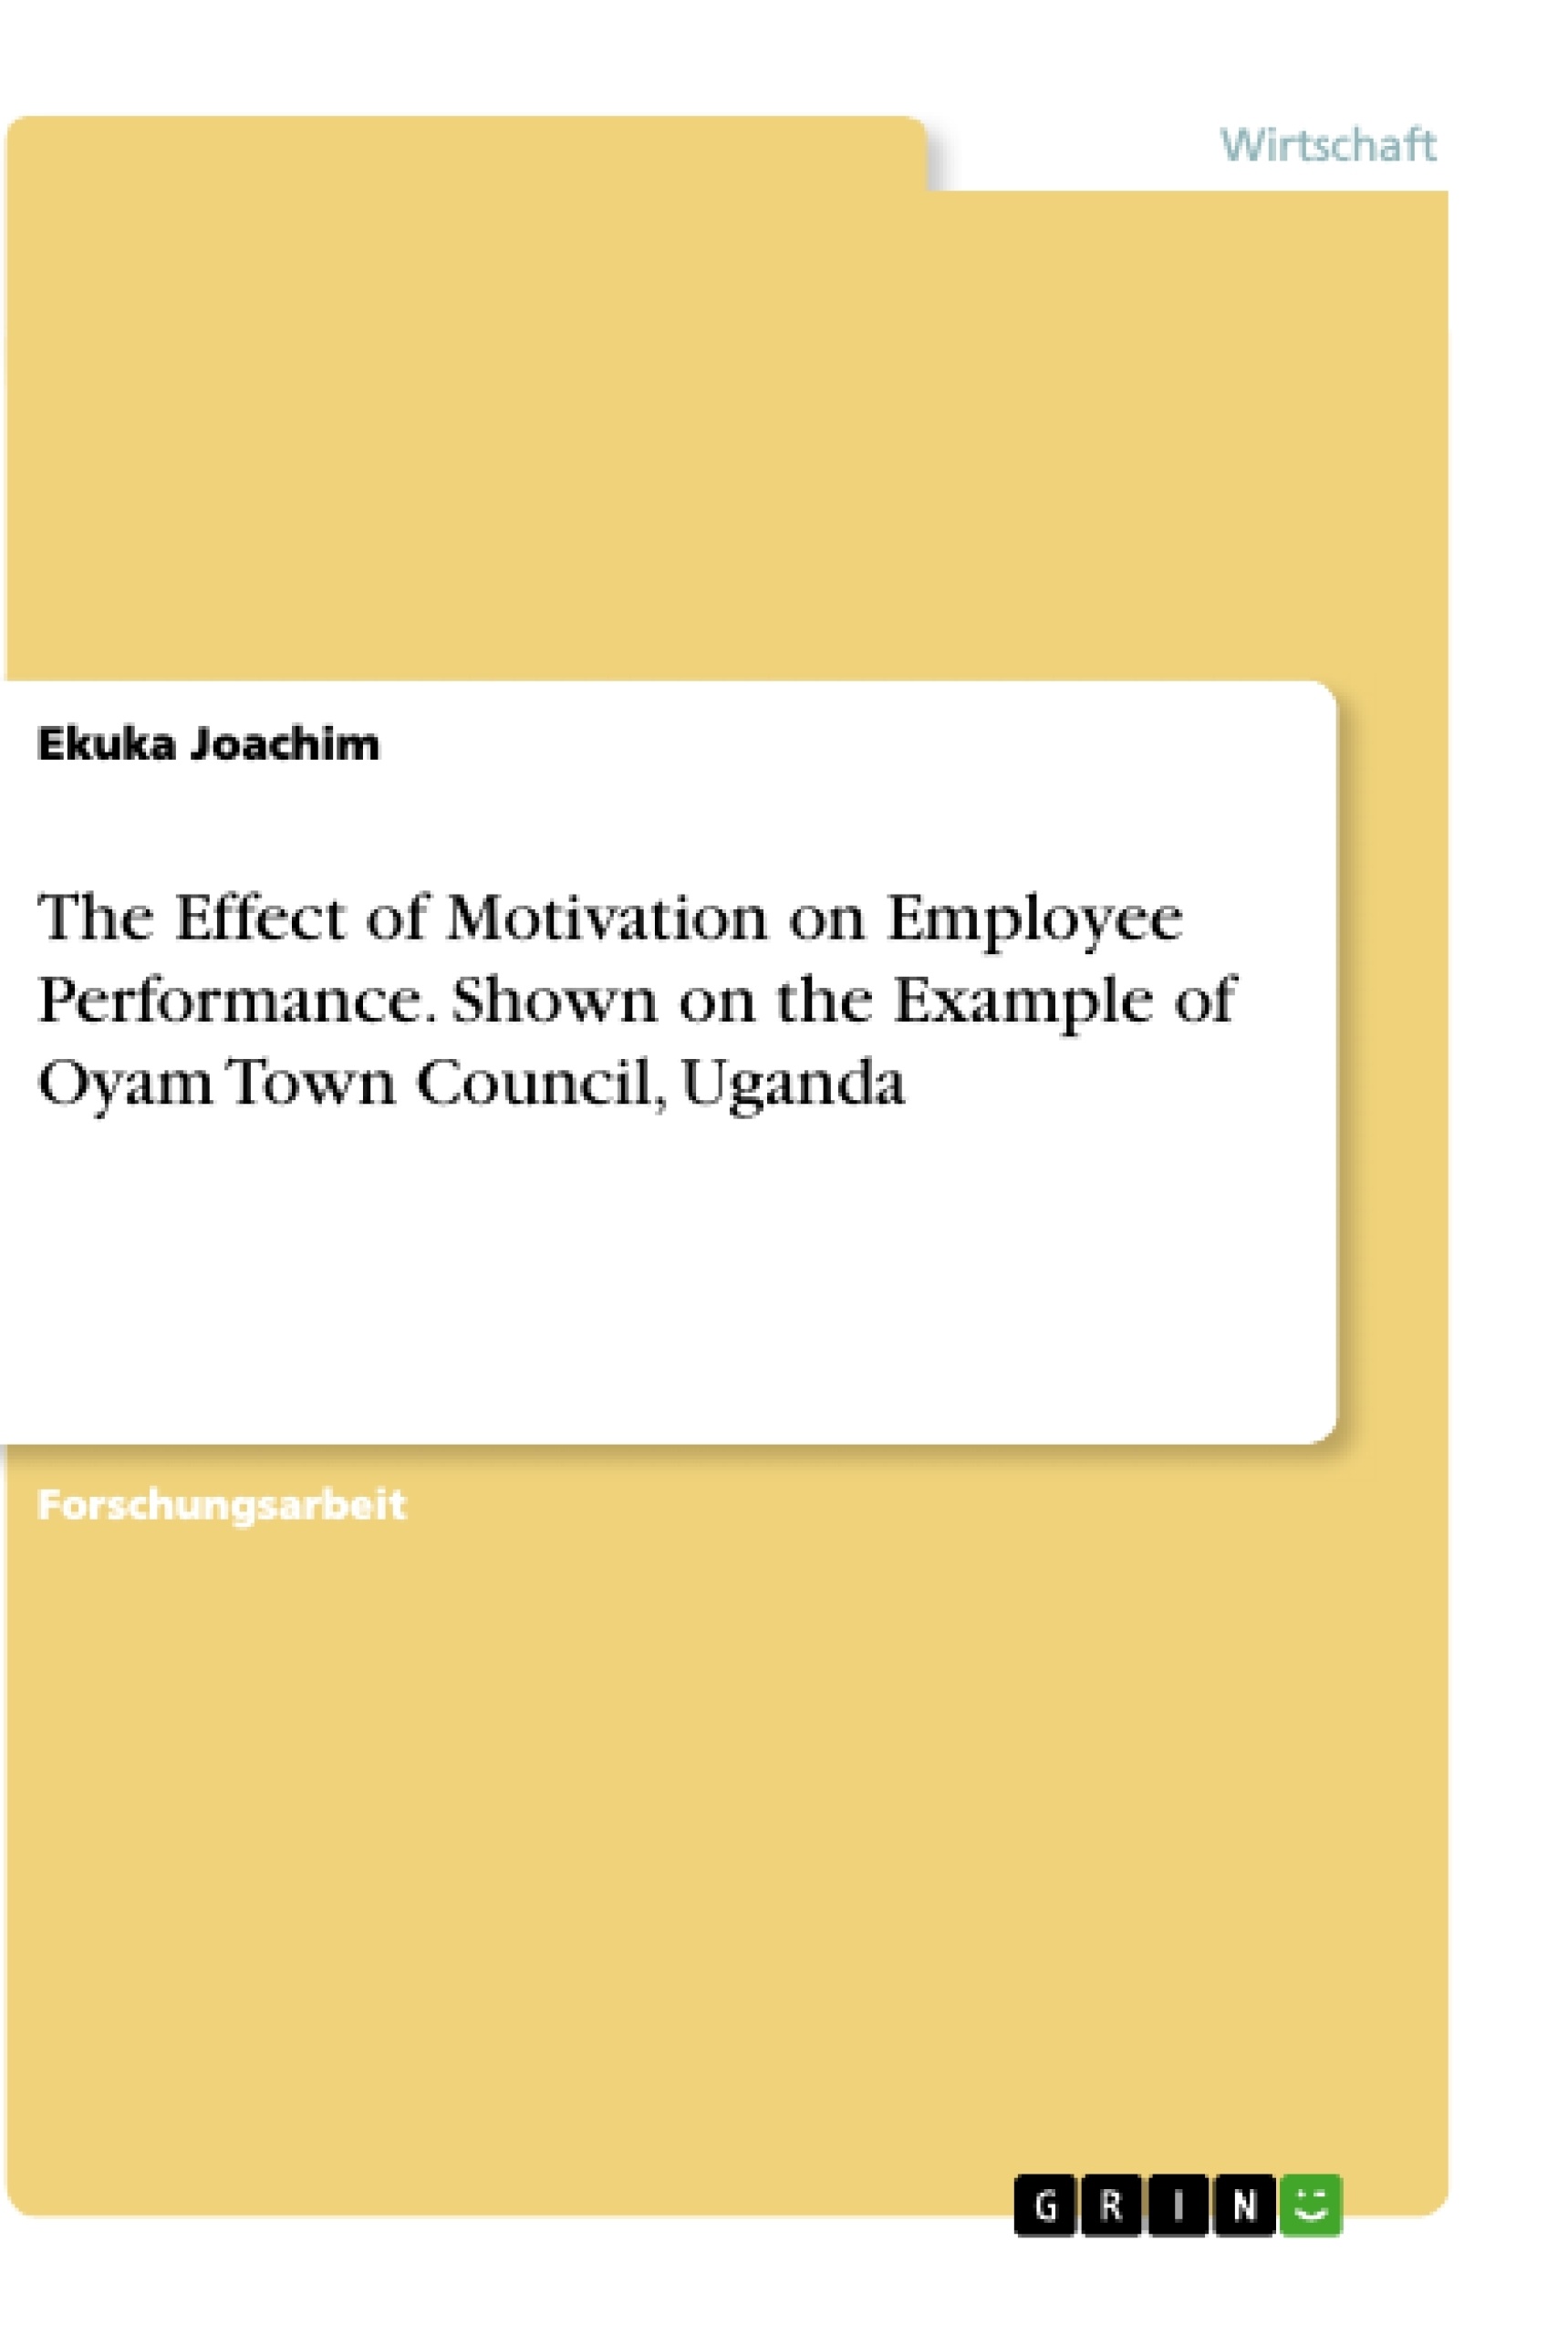 Titel: The Effect of Motivation on Employee Performance. Shown on the Example of Oyam Town Council, Uganda